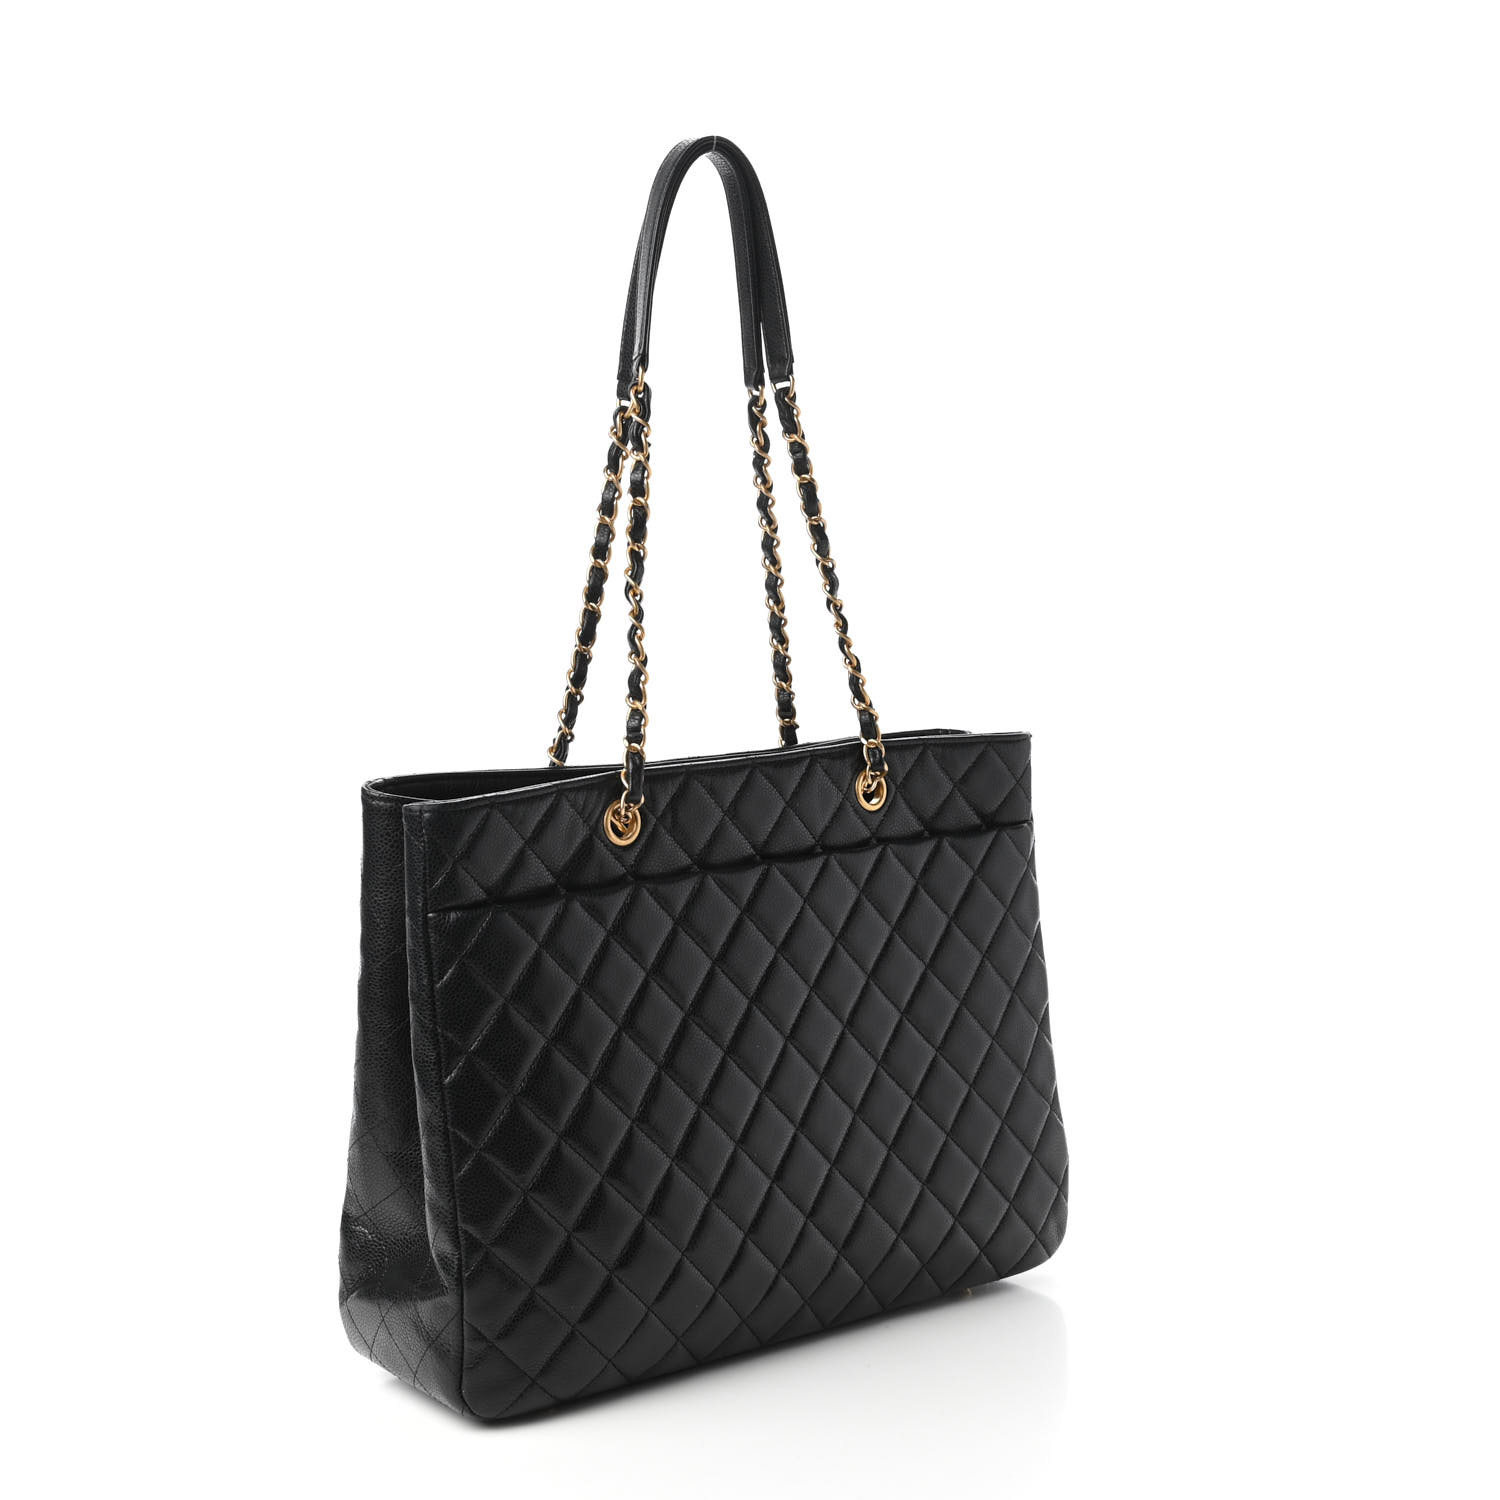 CHANEL Caviar Quilted Large Shopping Tote Black 744837 | FASHIONPHILE